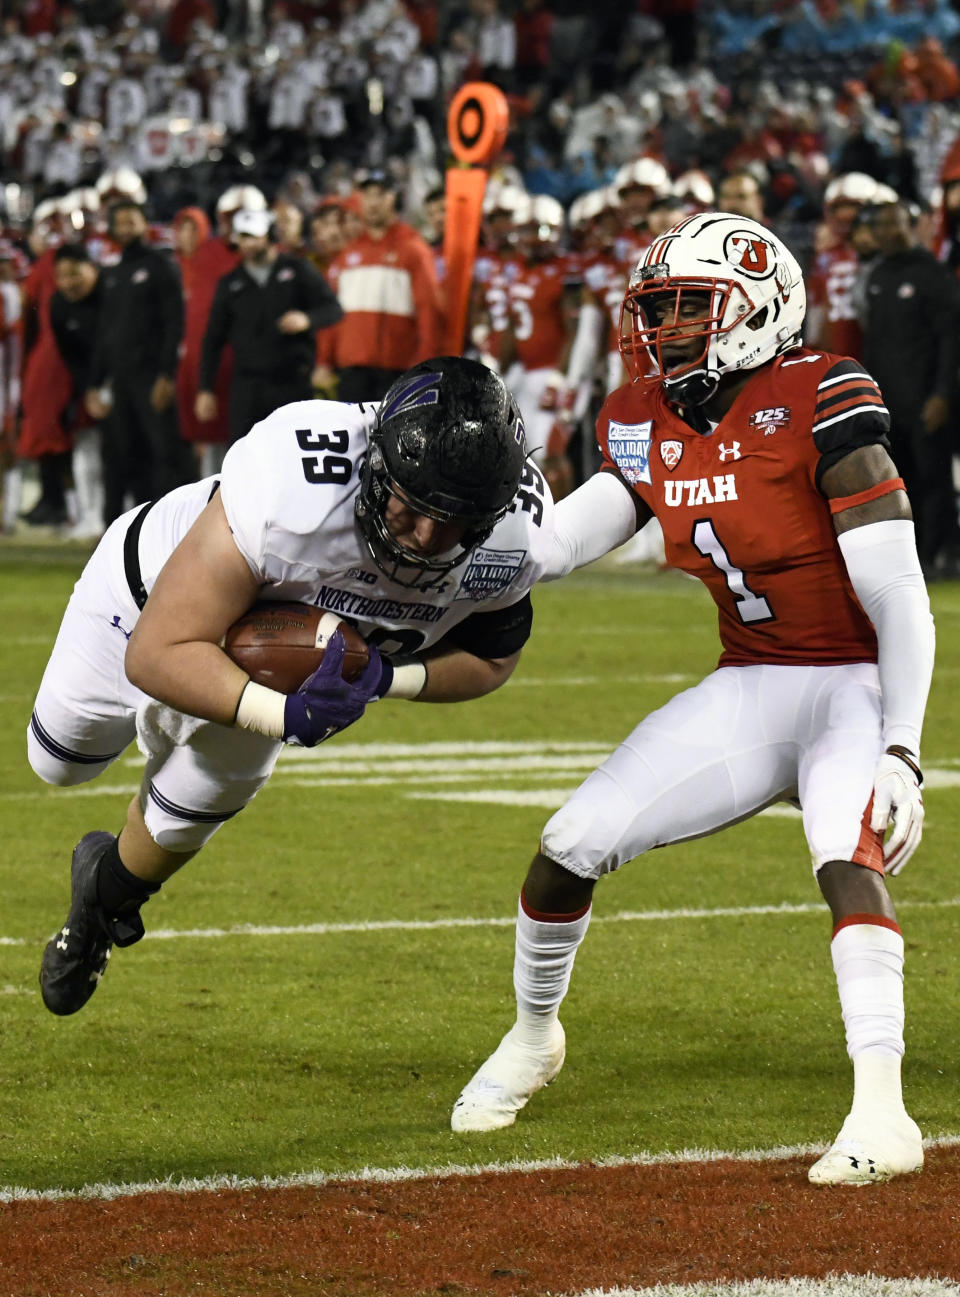 Northwestern offensive lineman Trey Klock (39) dives past Utah defensive back Jaylon Johnson (1) for a touchdown during the second half of the Holiday Bowl NCAA college football game against Utah, Monday, Dec. 31, 2018, in San Diego. (AP Photo/Denis Poroy)